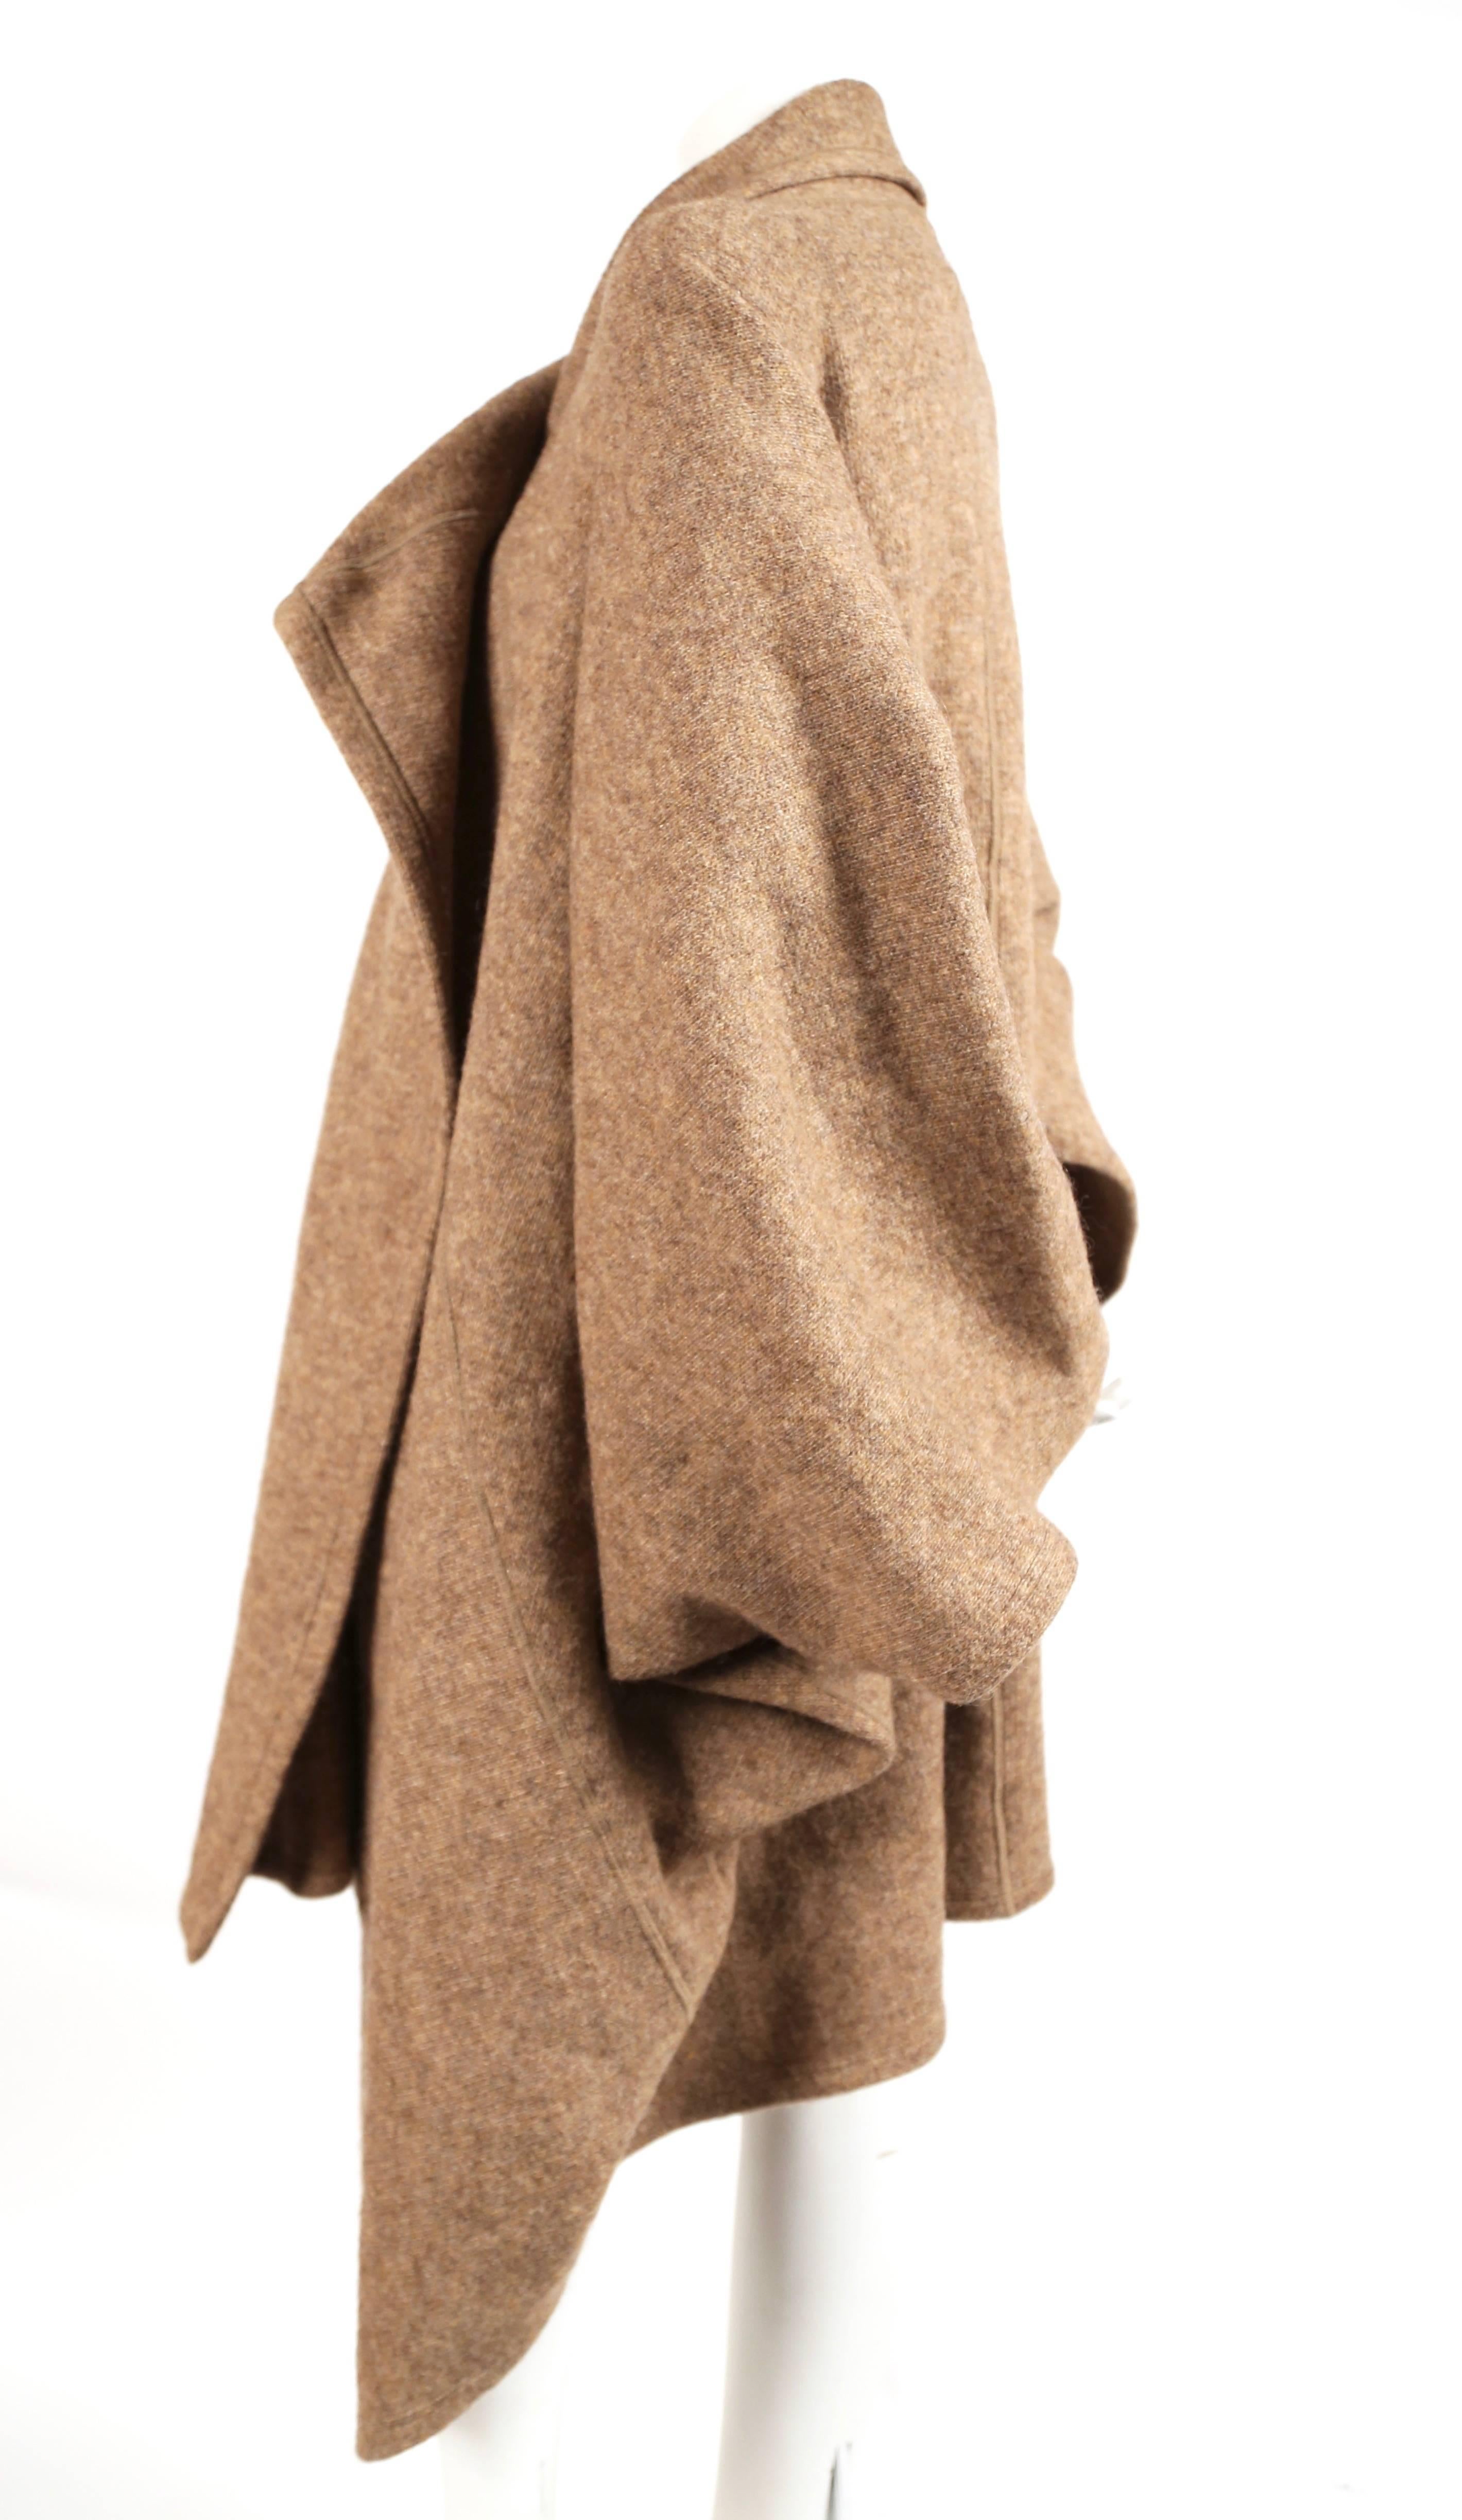 Very rare tan knit wool coat with draped front and pockets from Issey Miyake dating to 1984 exactly as seen on the runway with important provenance. No size indicated however this fits most sizes due to the oversized cut. Photographed on a size 2